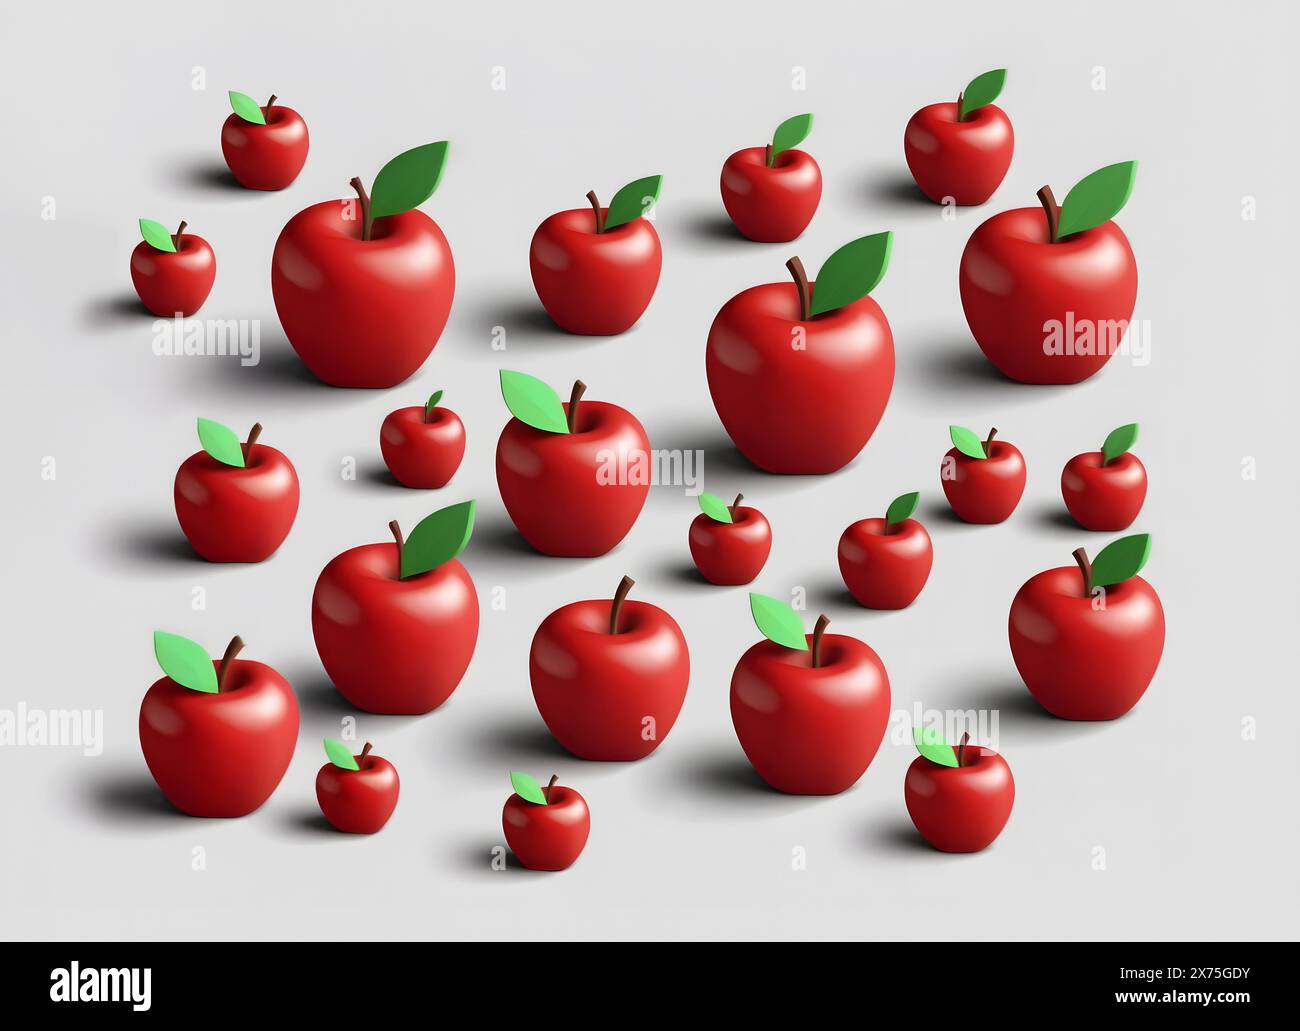 Red apples background in white color, isometric Stock Photo